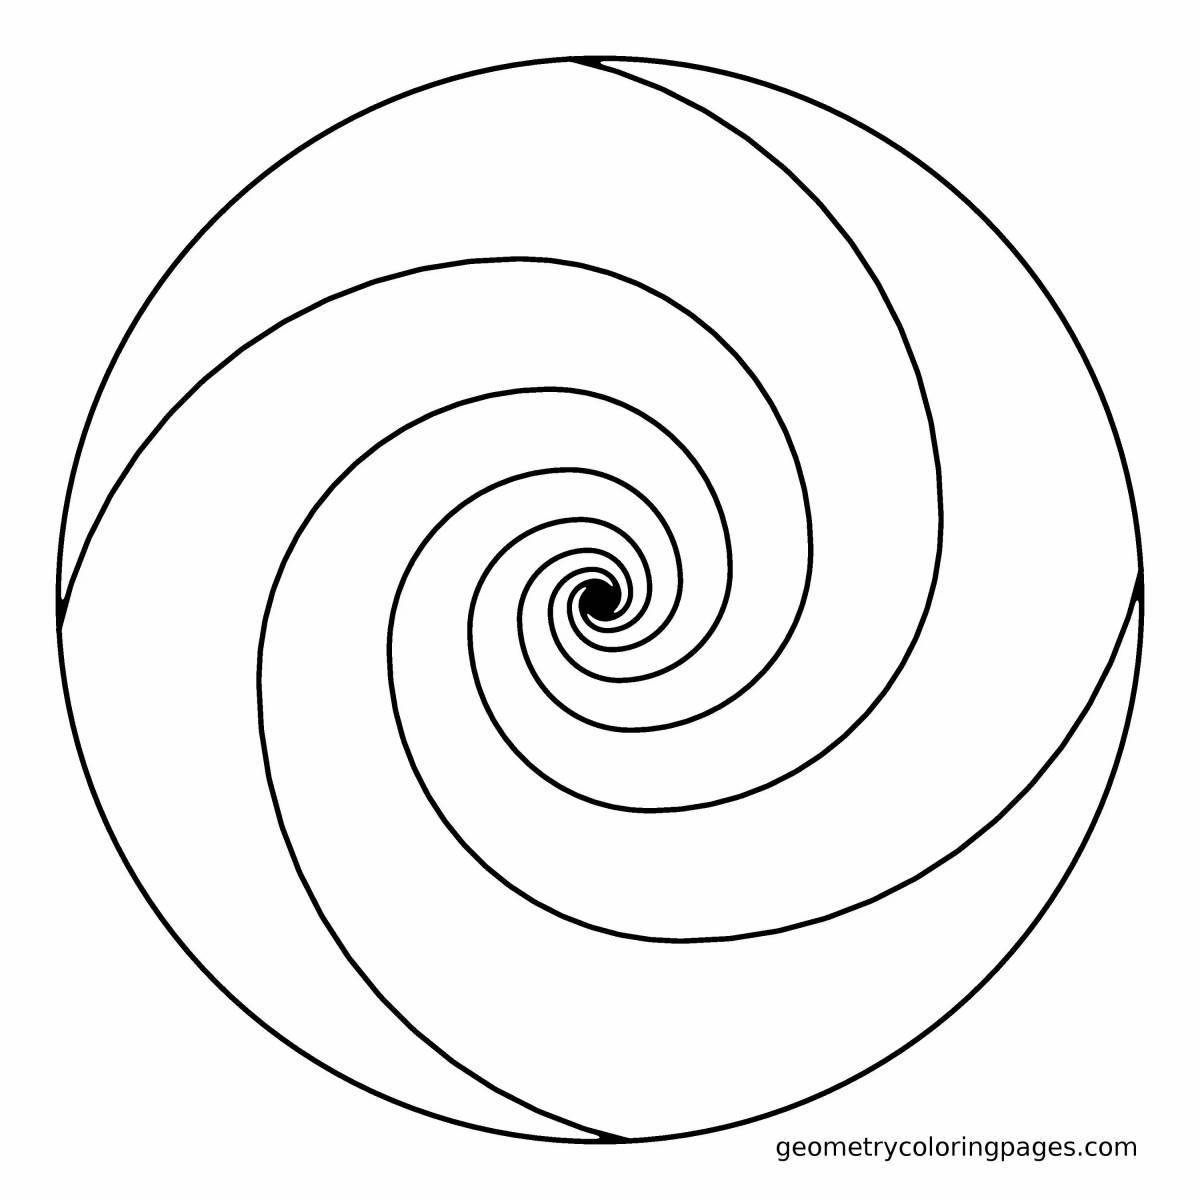 Amazing spiral coloring page